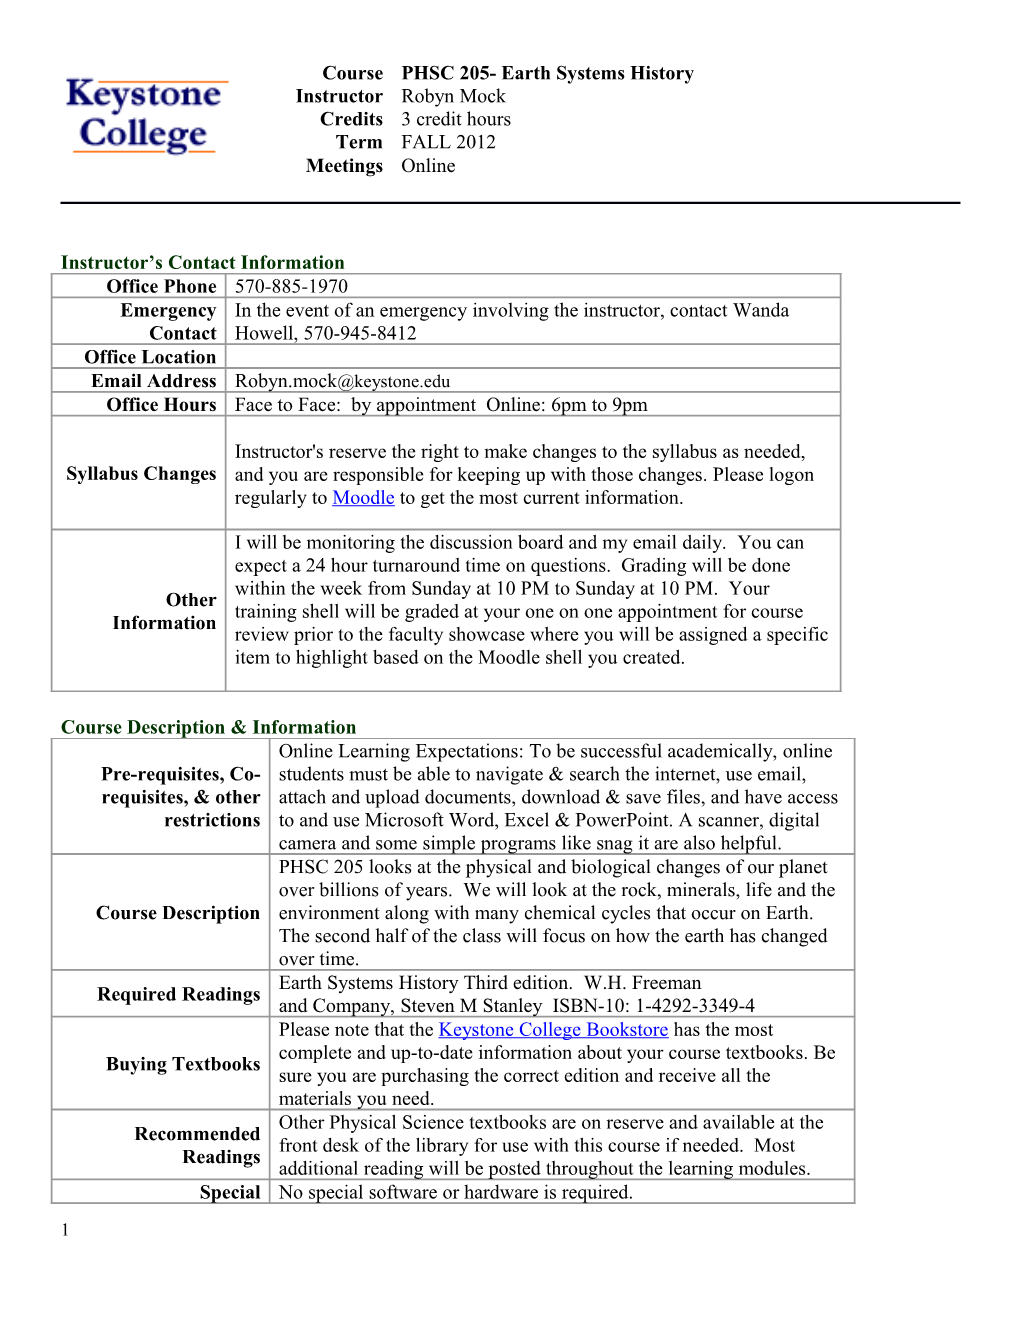 Syllabus Template - Online Learning s2